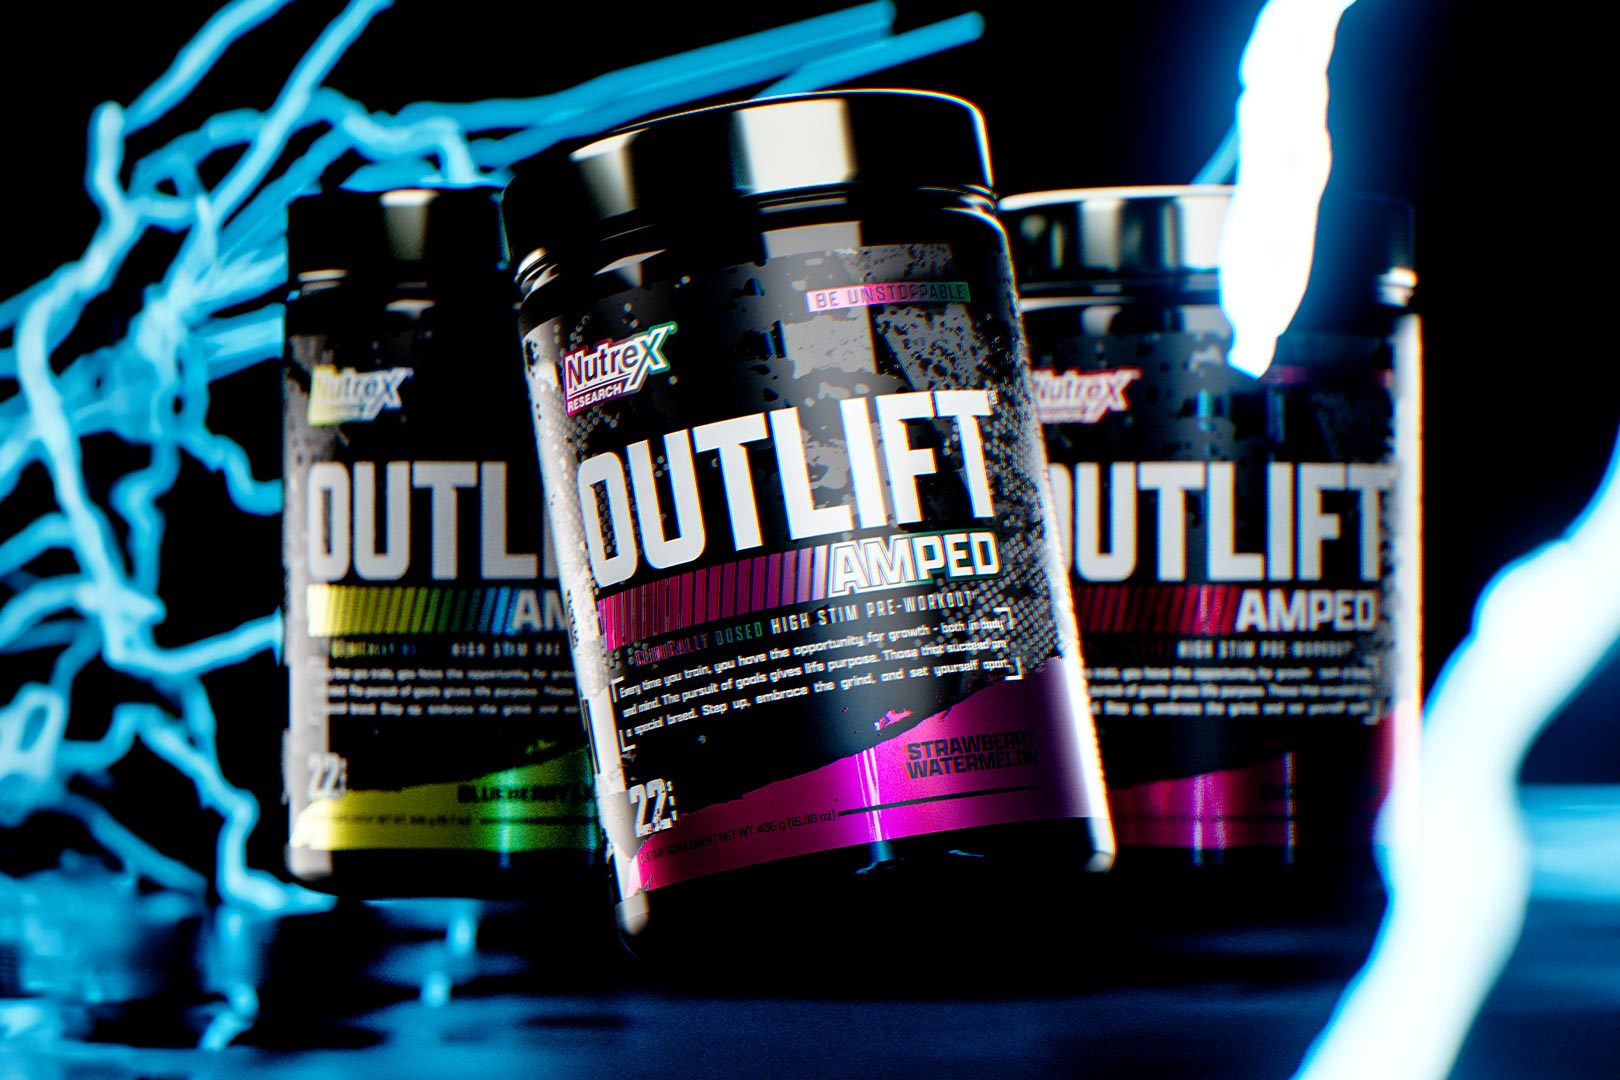 Nutrex brings back its high-stimulant Outlift Amped pre-workout